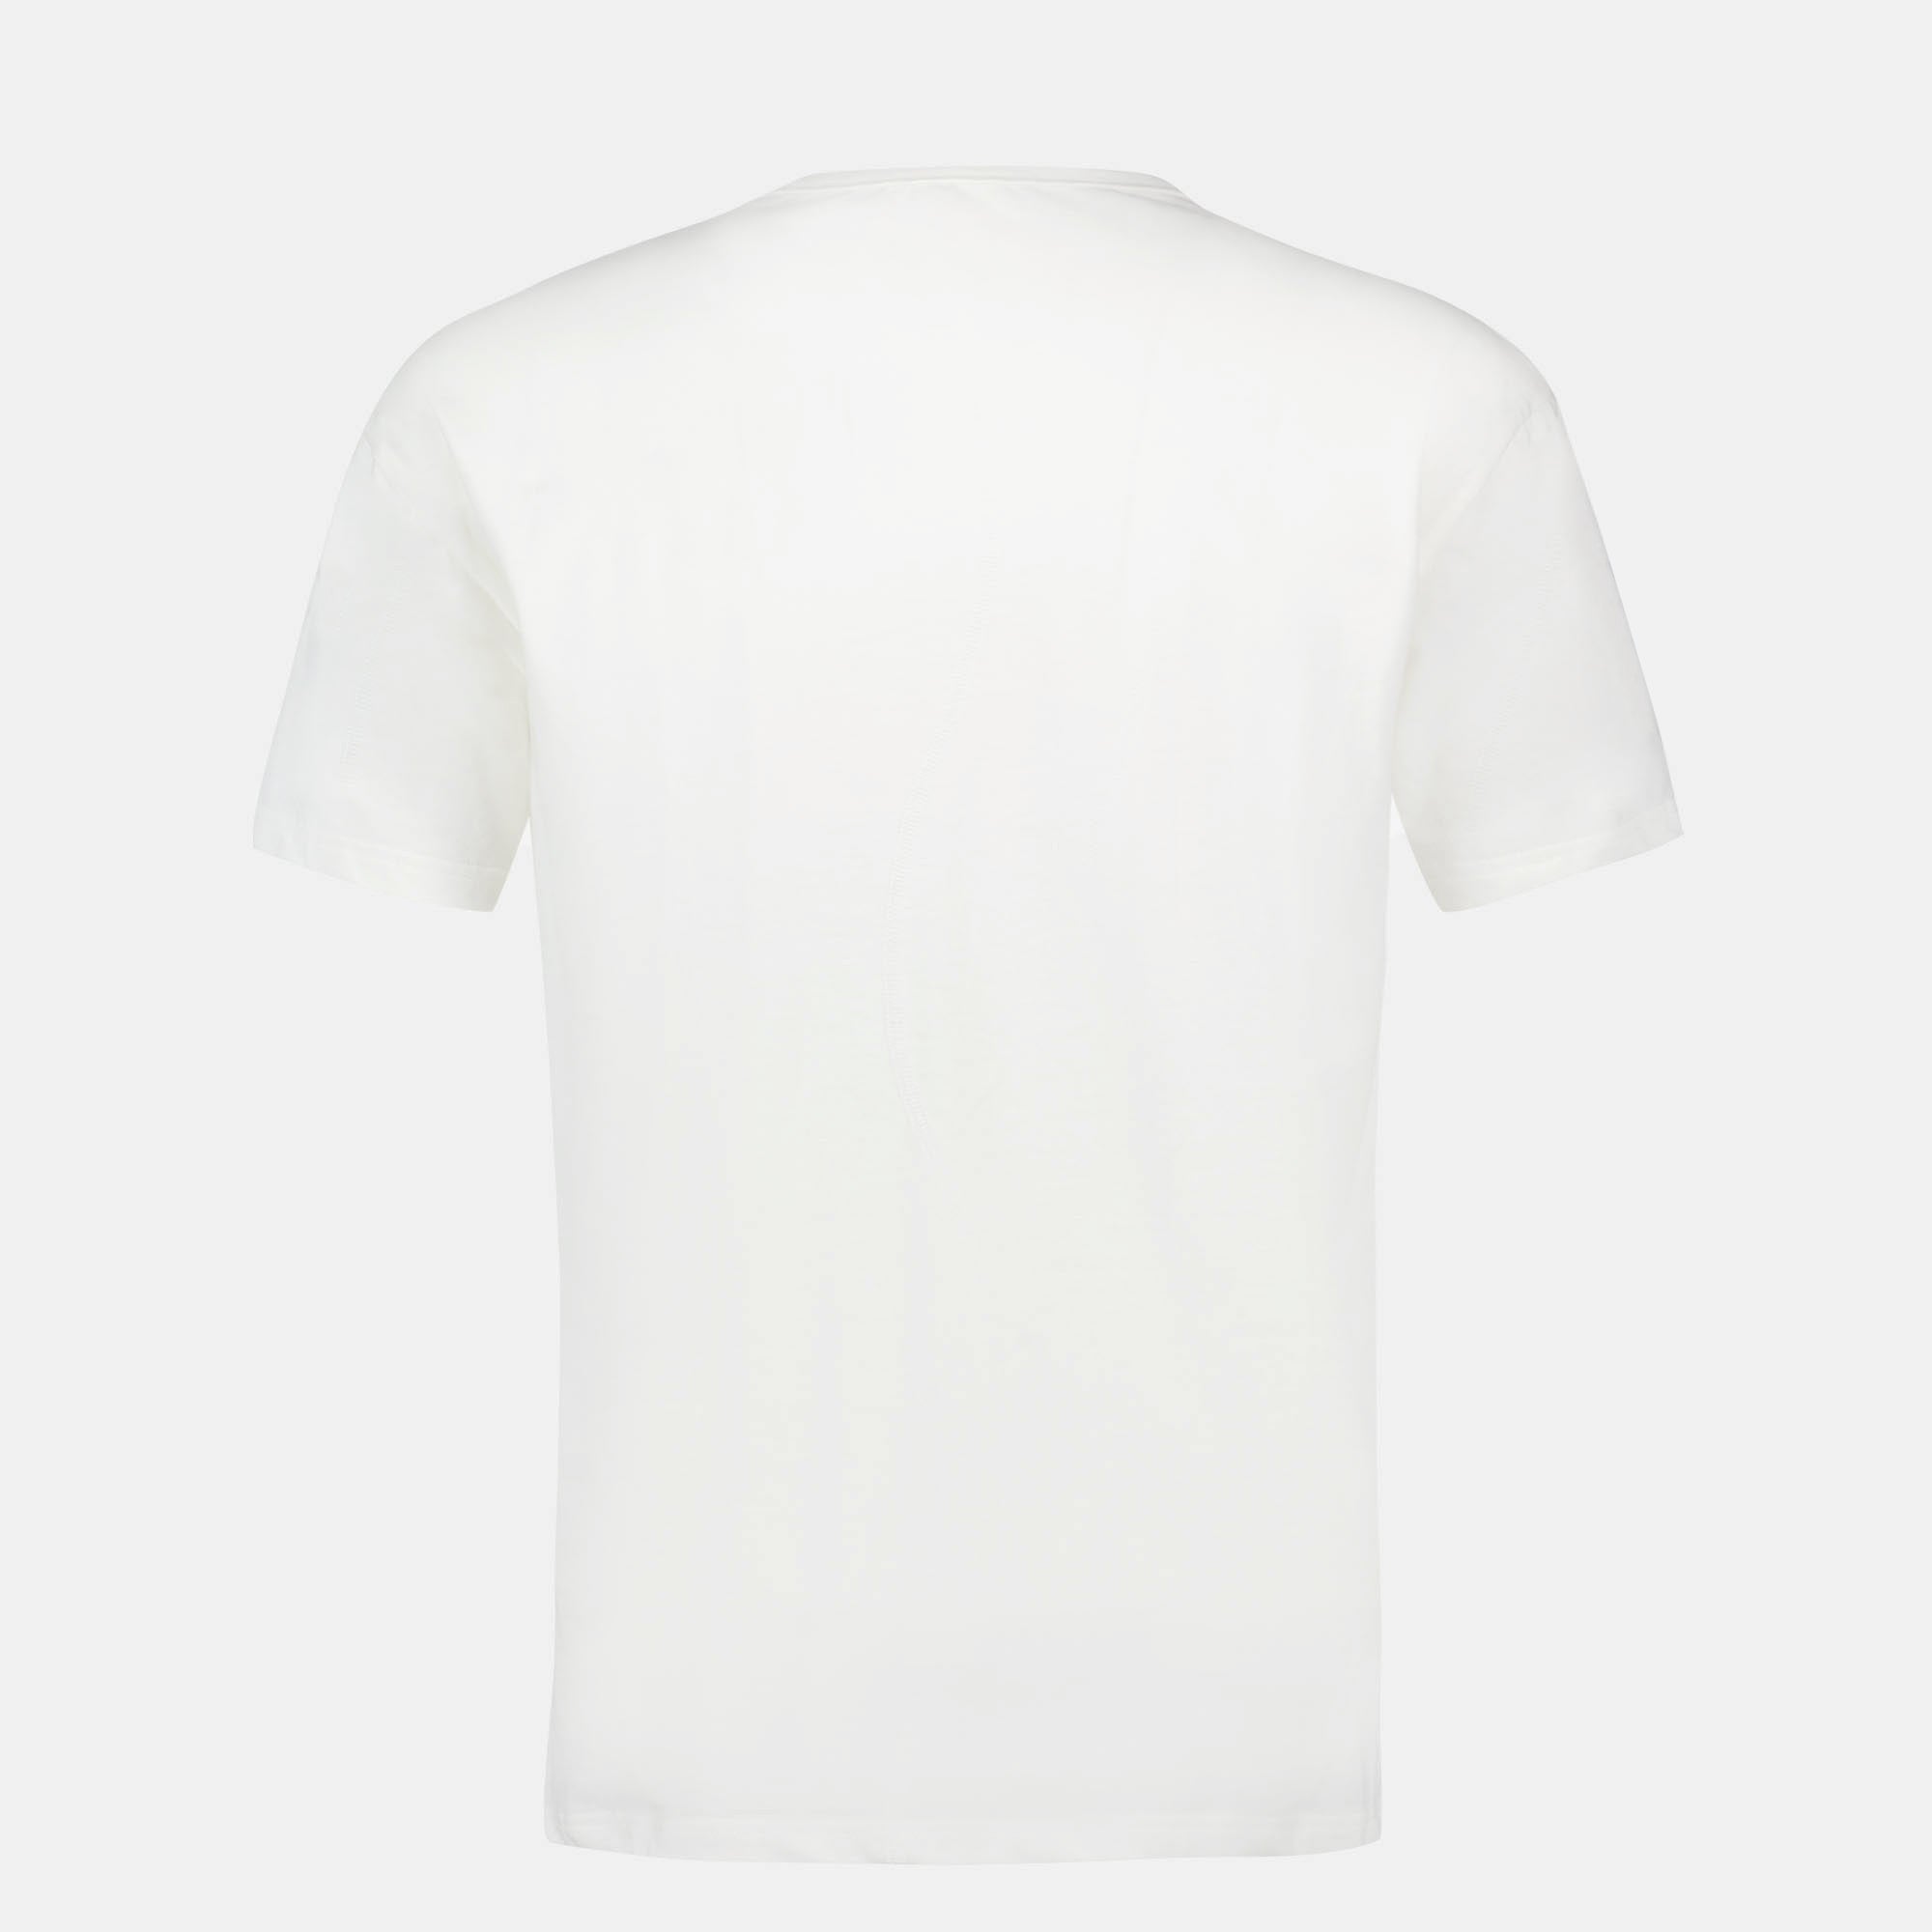 2410046-EFRO 24 Tee SS N°5 M new optical white | T-shirt Équipe de France Homme